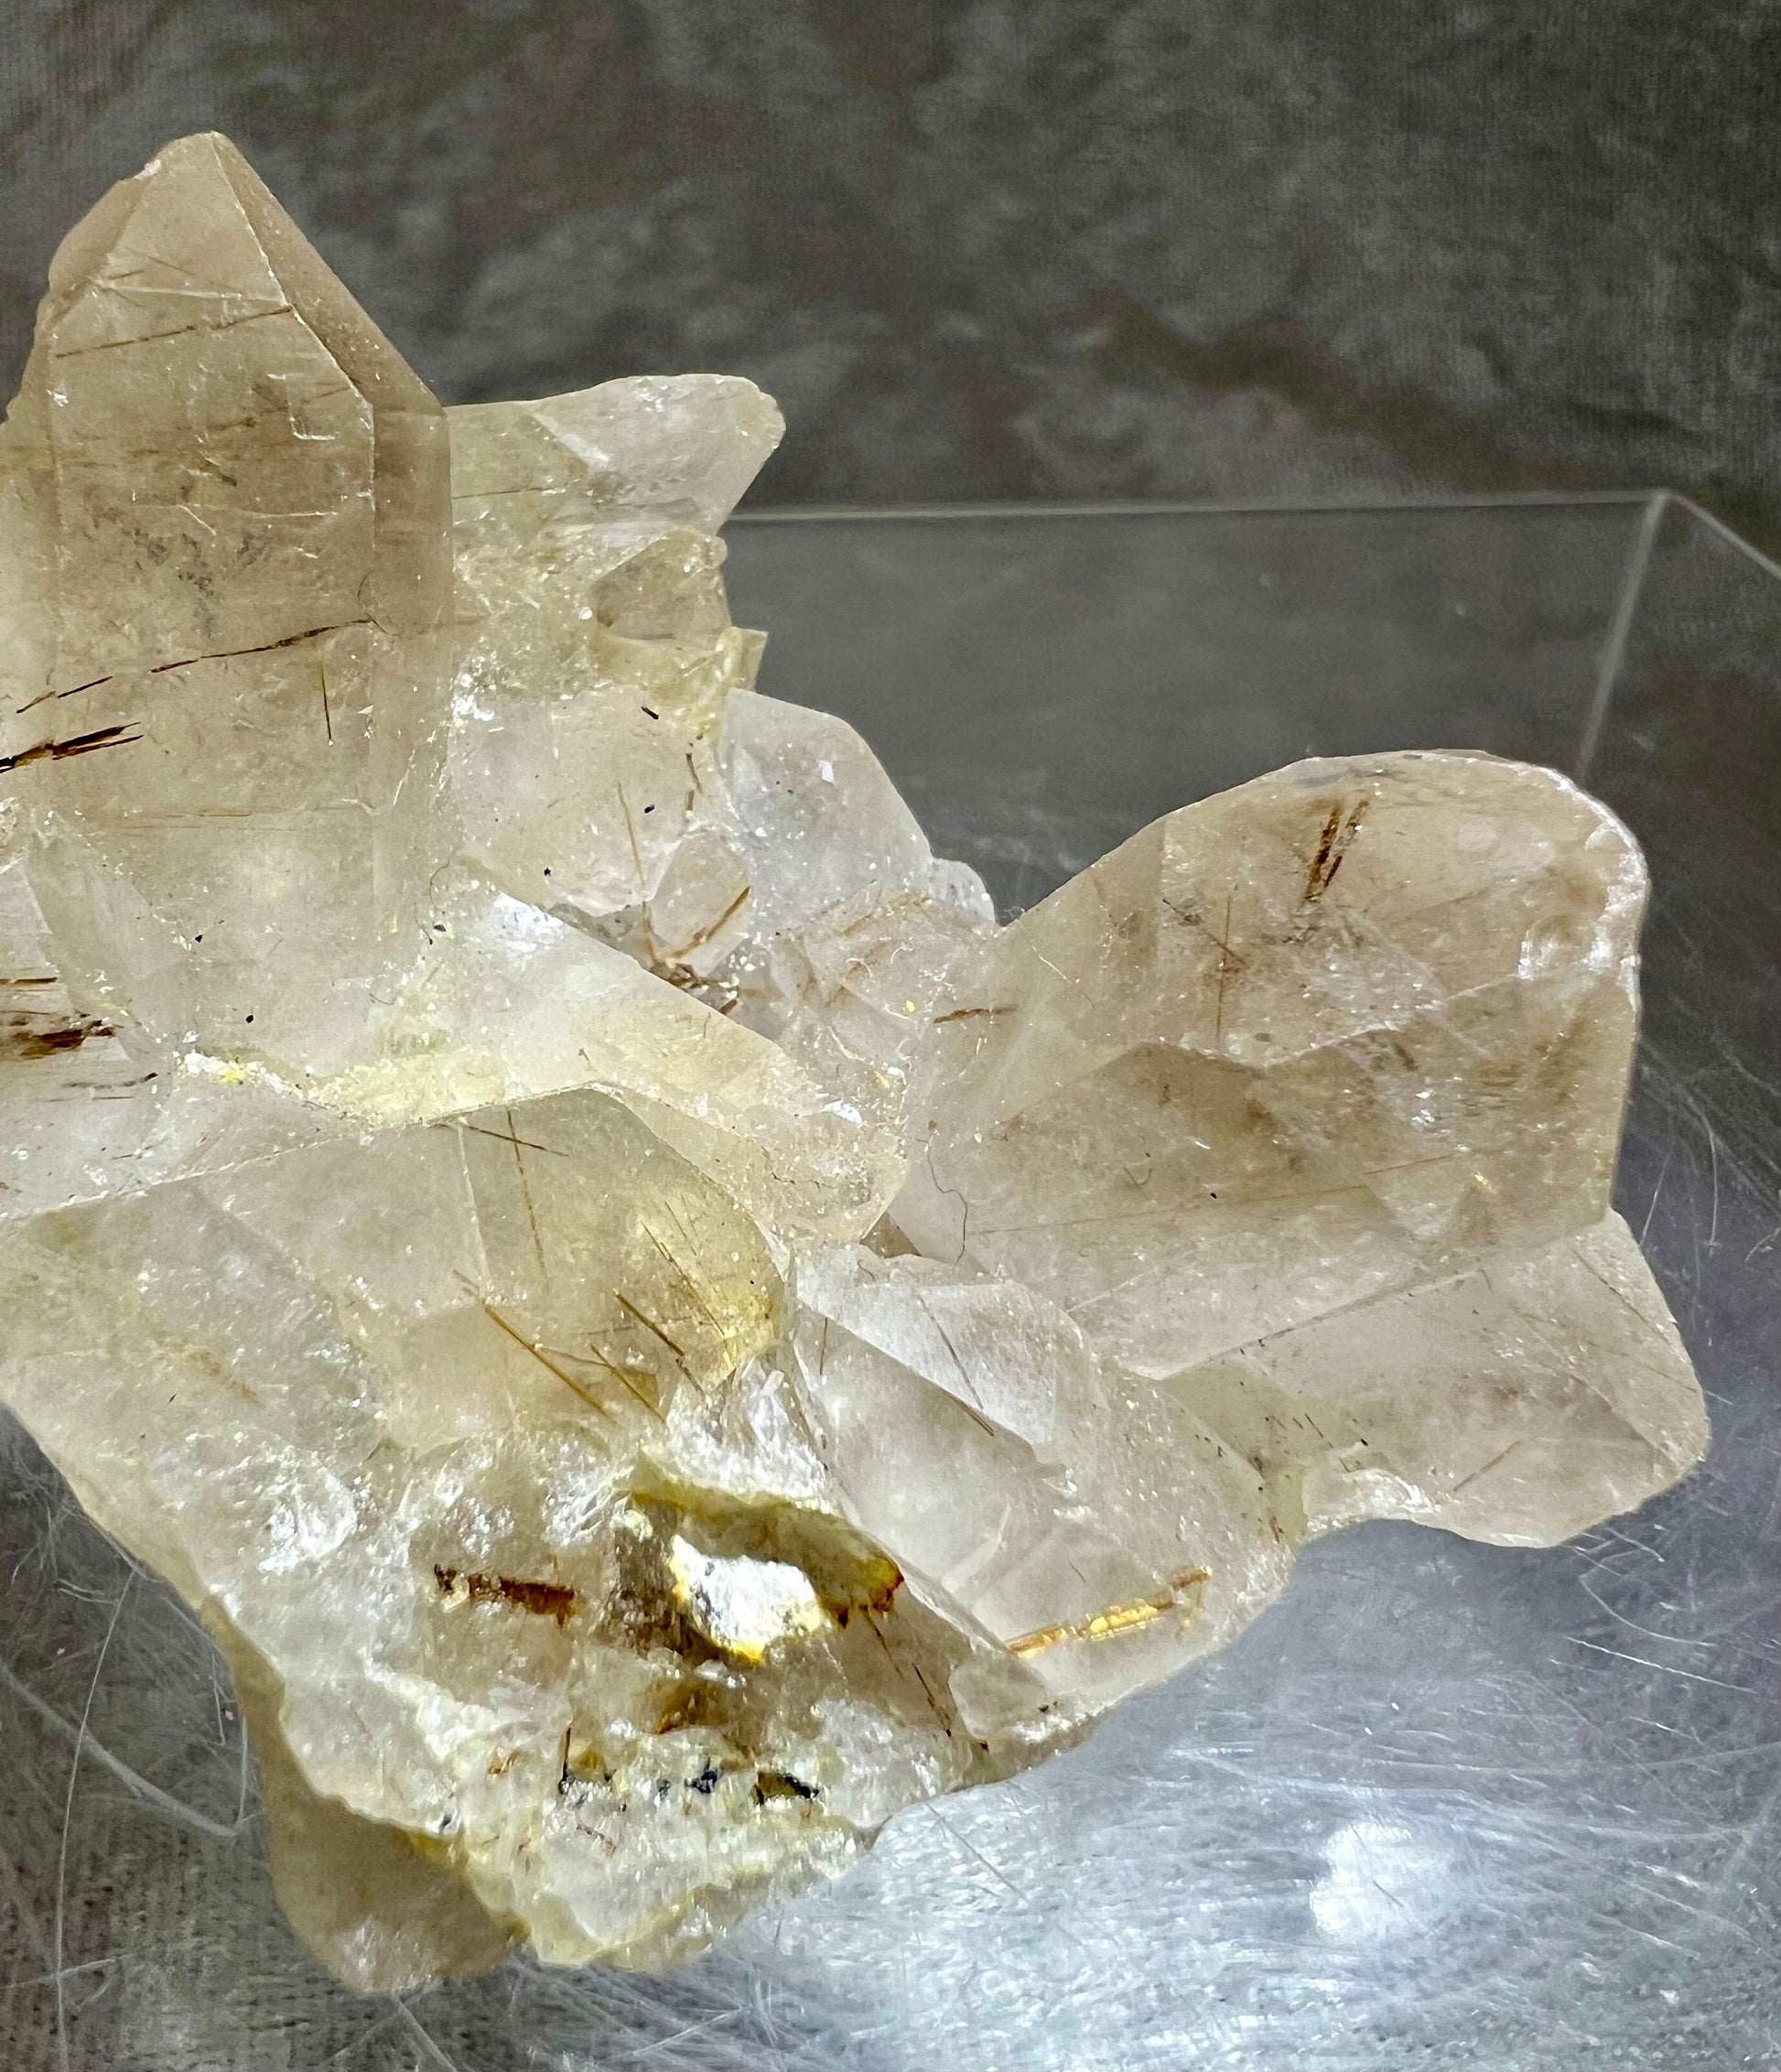 Amazing Smoky Rutile Quartz Cluster From Brazil. Very Rare One Of A Kind Specimen. Stunning All Natural Rutilated Quartz Display Crystal